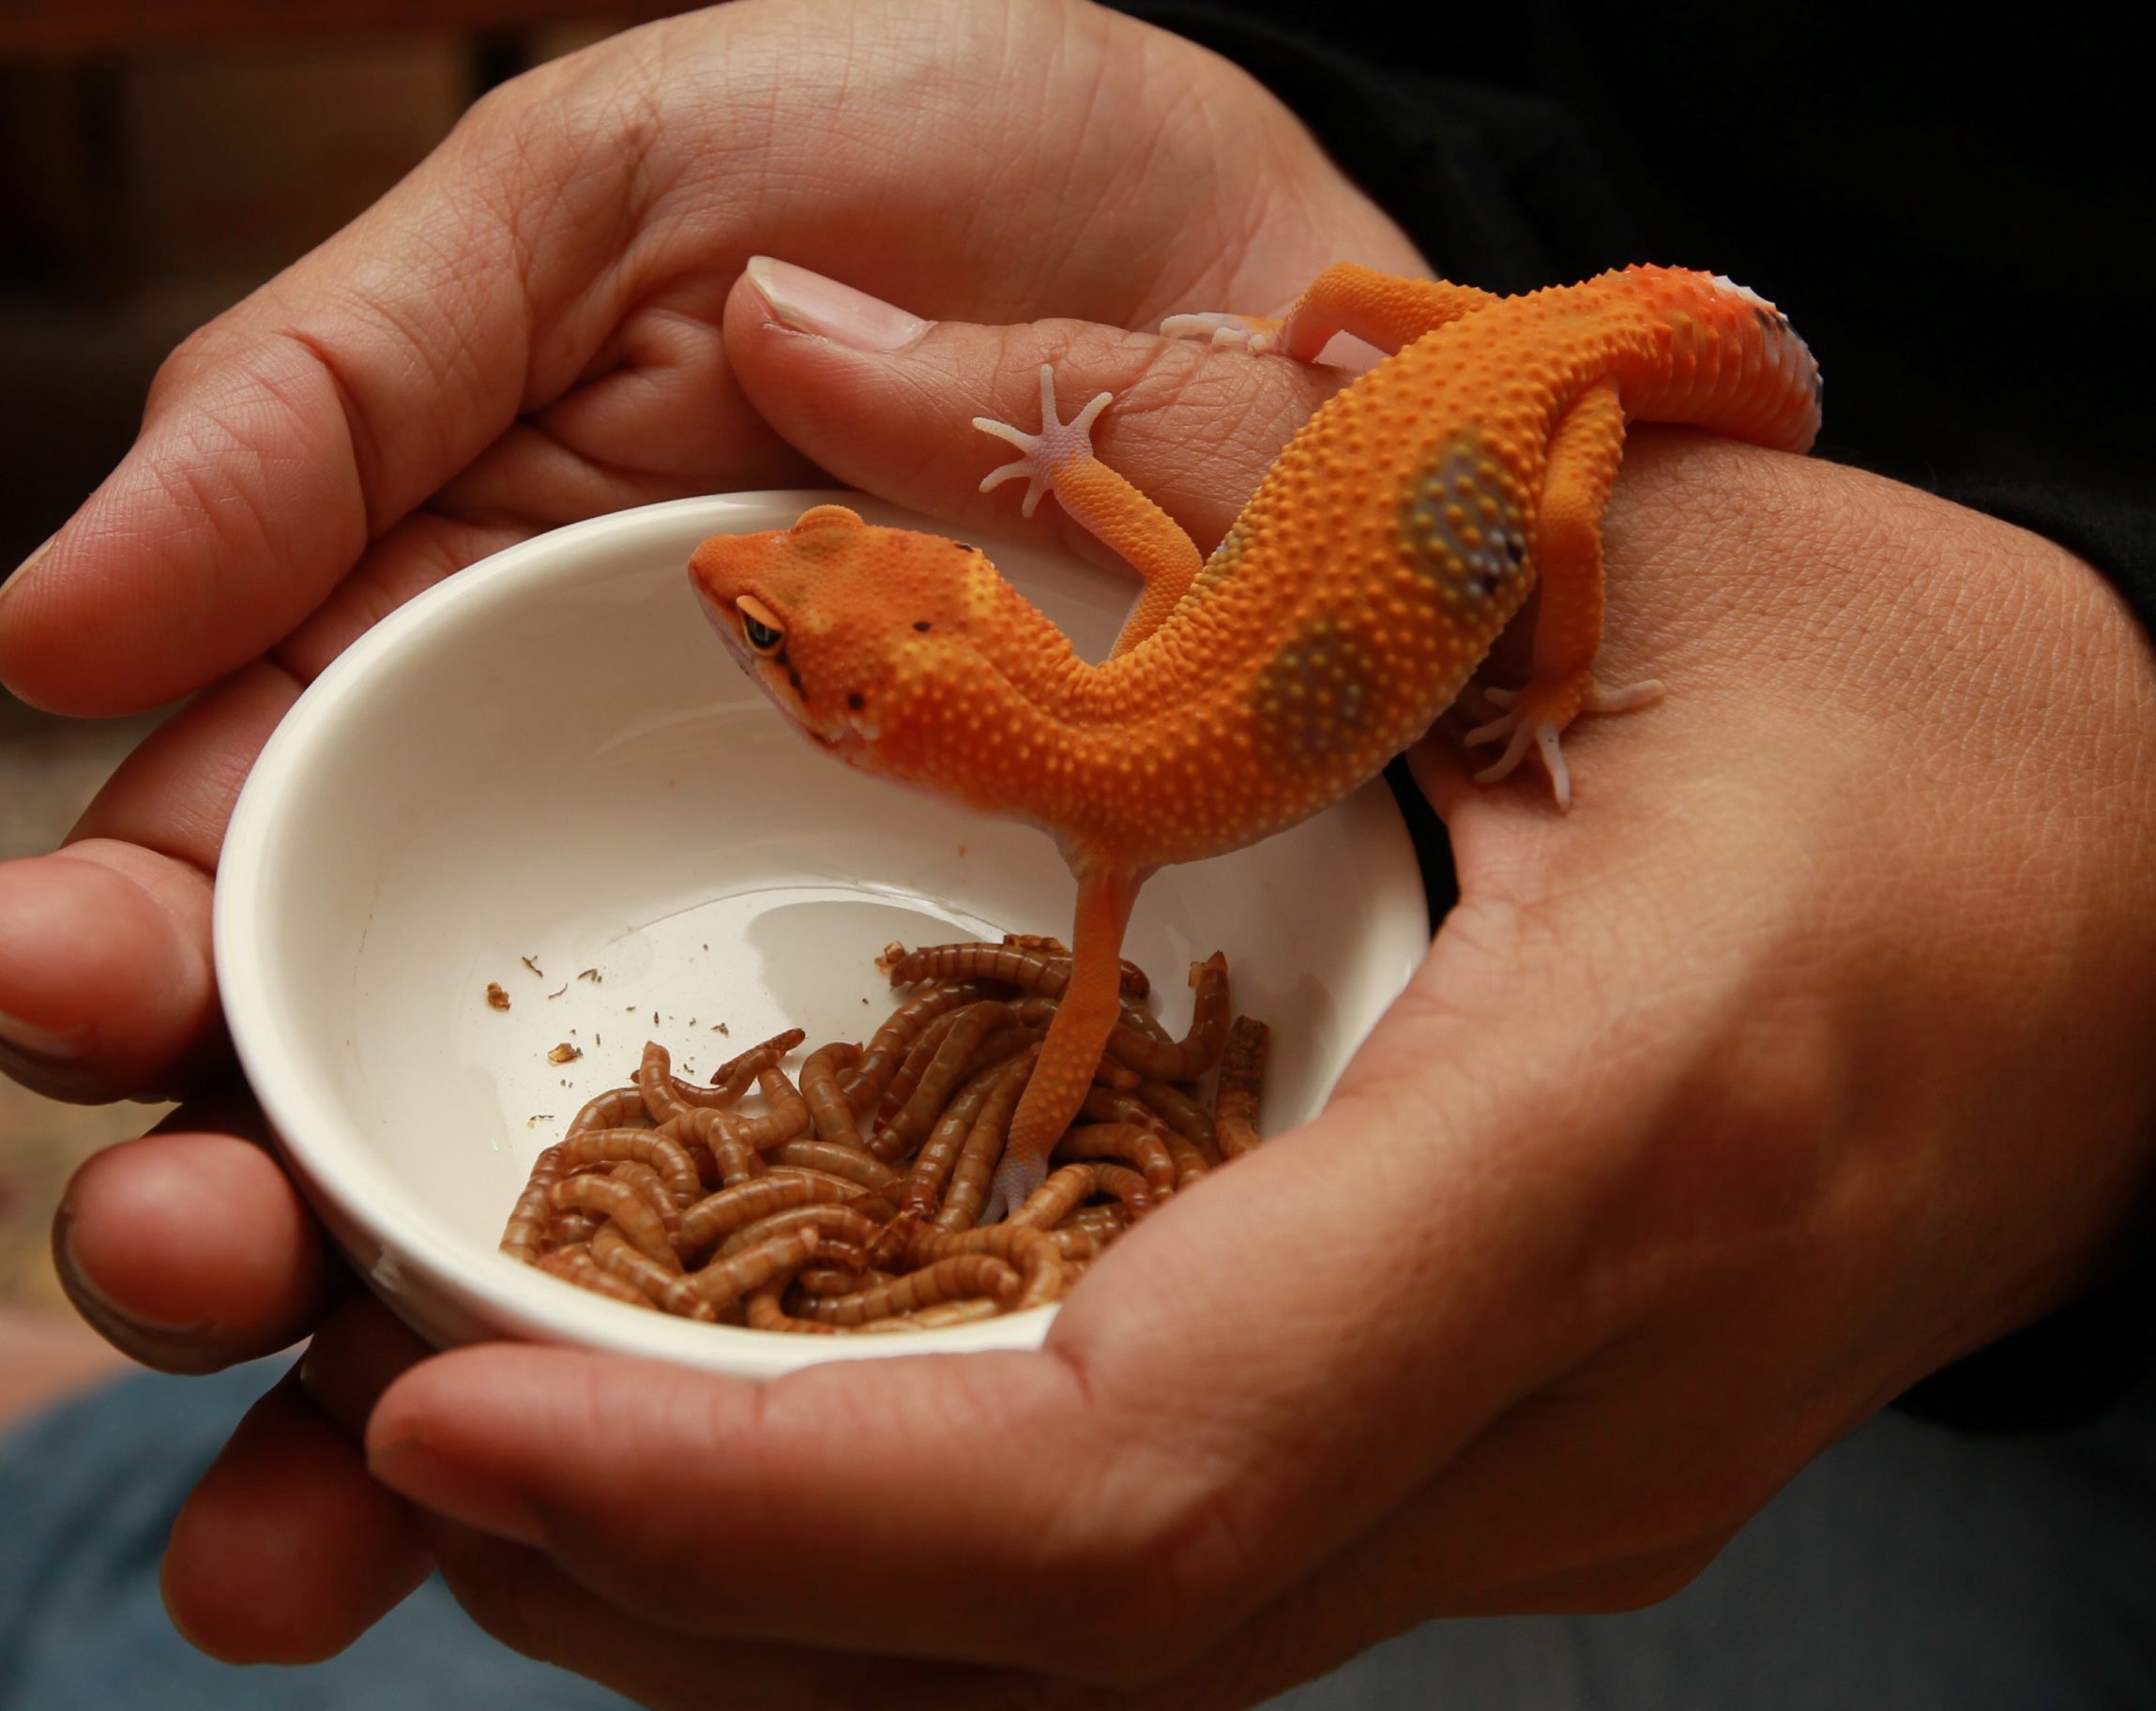 person carrying a orange and gray gecko on a white ceramic cup filled with brown worms